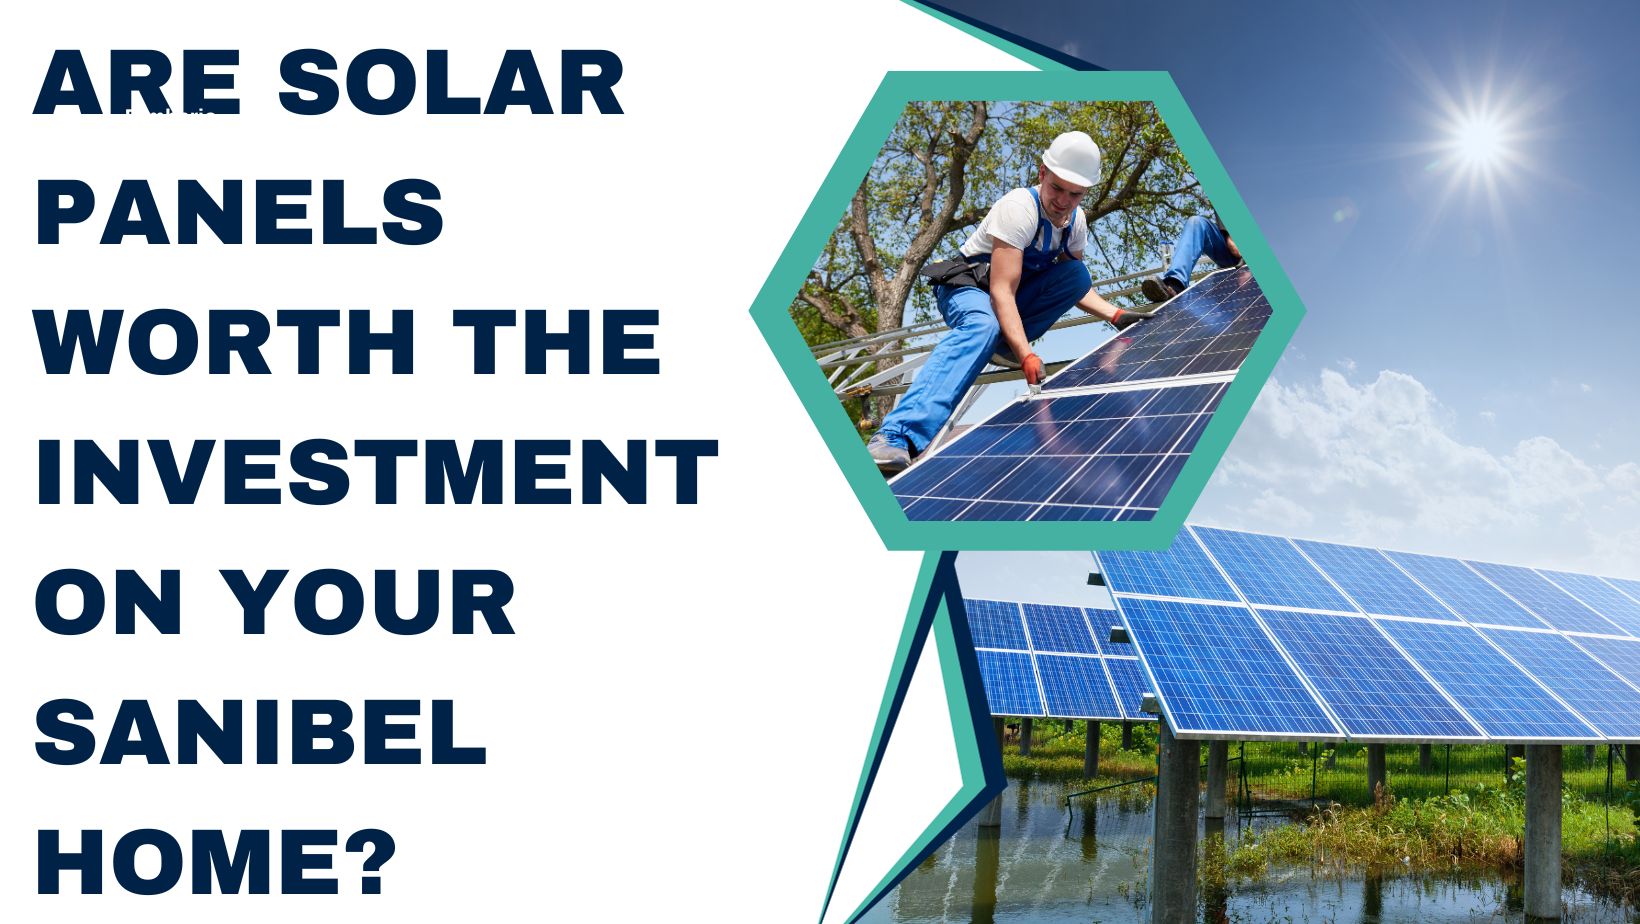 Are Solar Panels Worth the Investment on Your Sanibel Home?